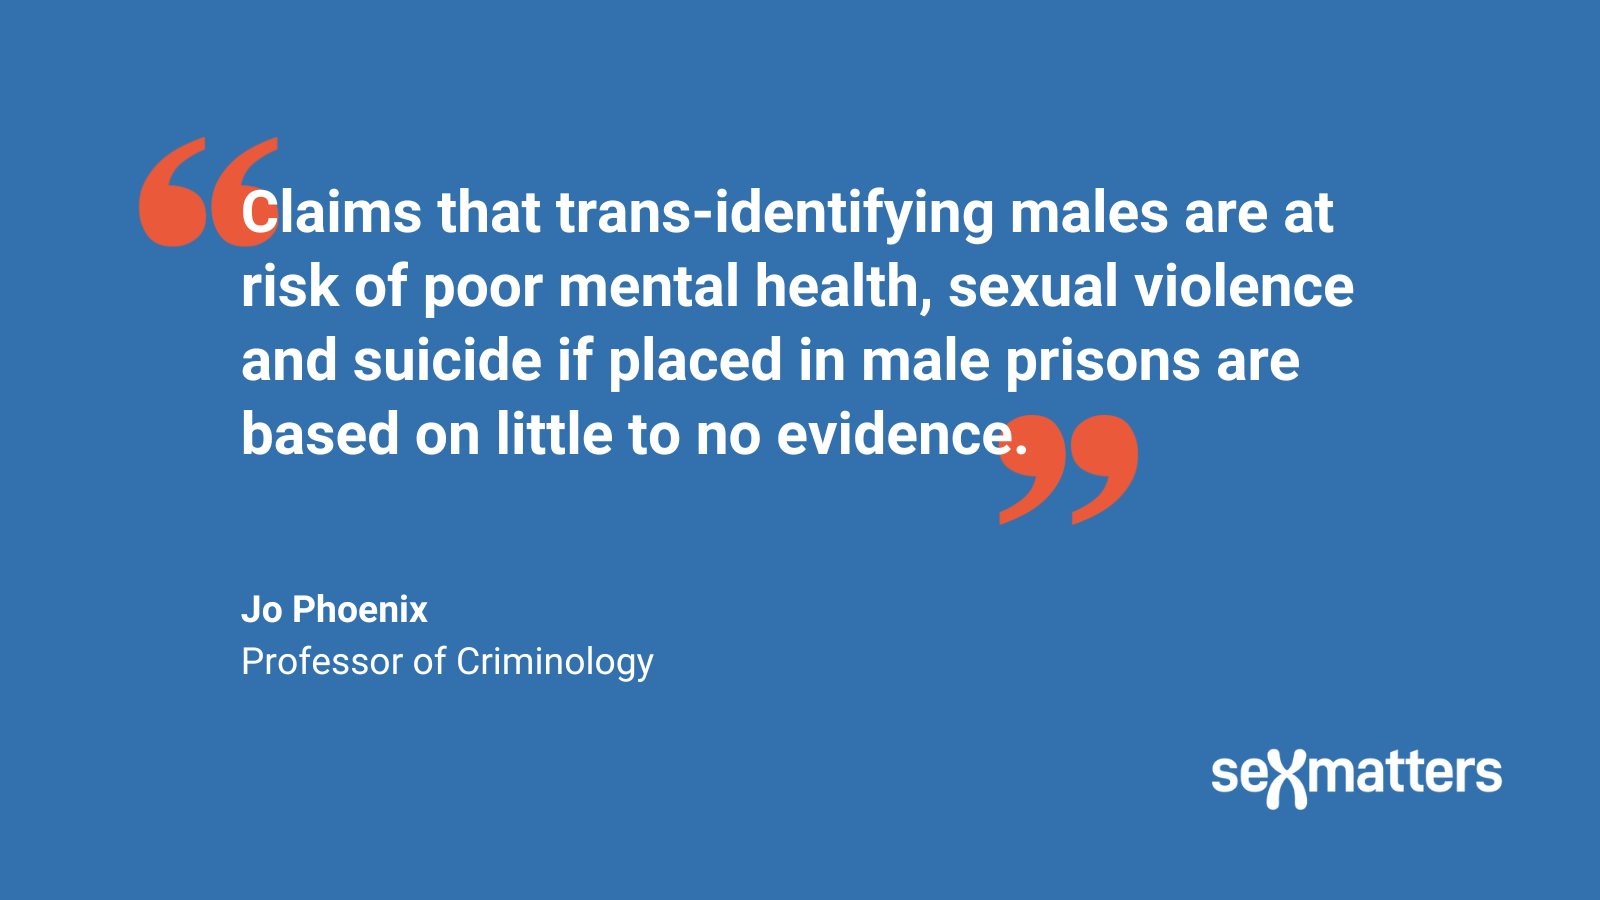 Claims that trans-identifying males are at risk of poor mental health, sexual violence and suicide if placed in male prisons are based on little to no evidence.